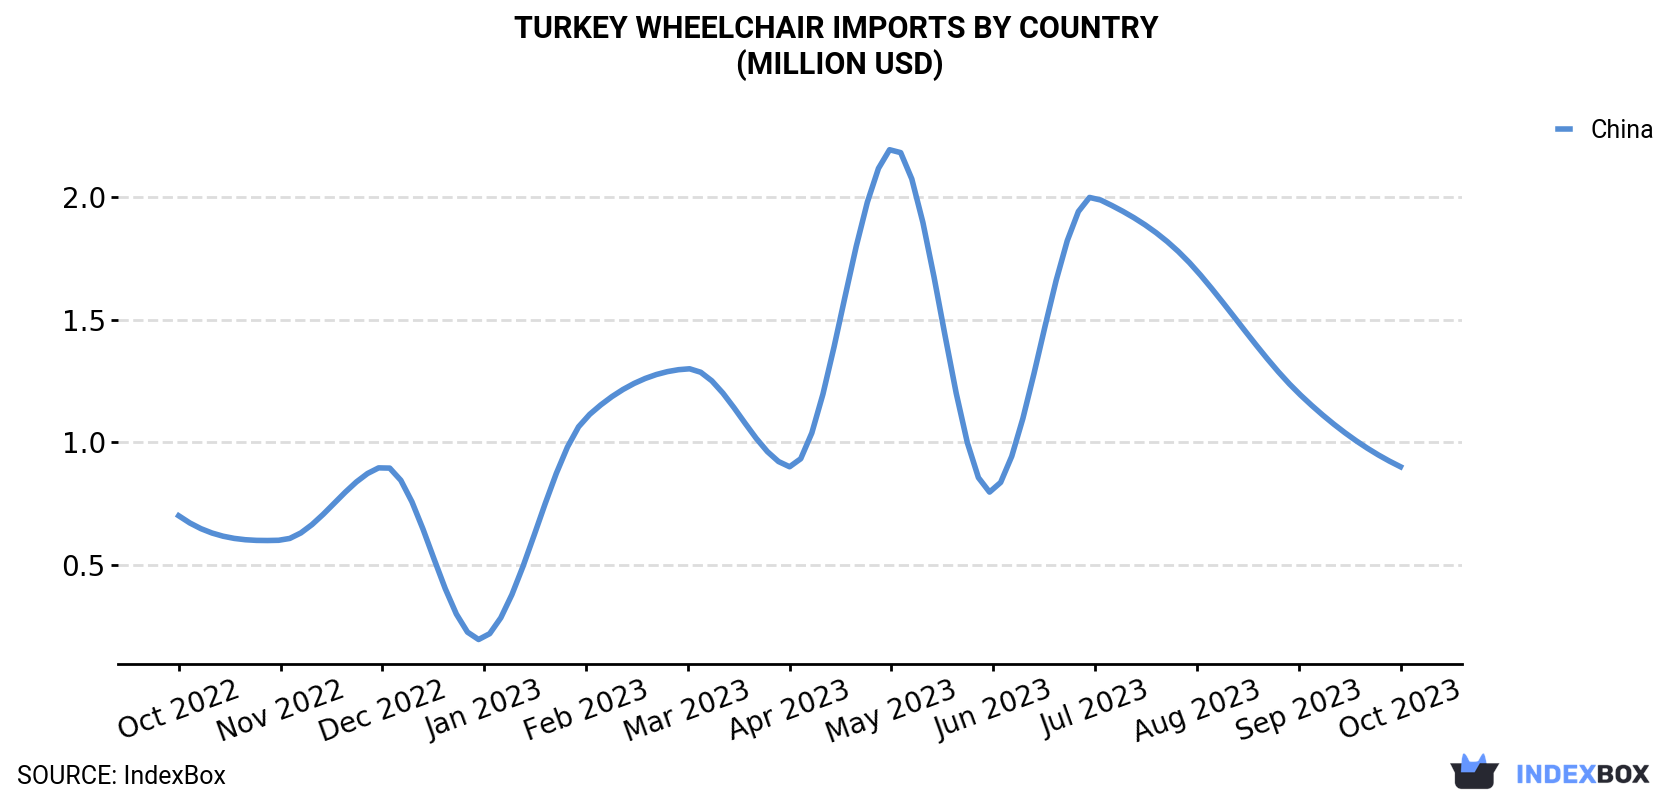 Turkey Wheelchair Imports By Country (Million USD)